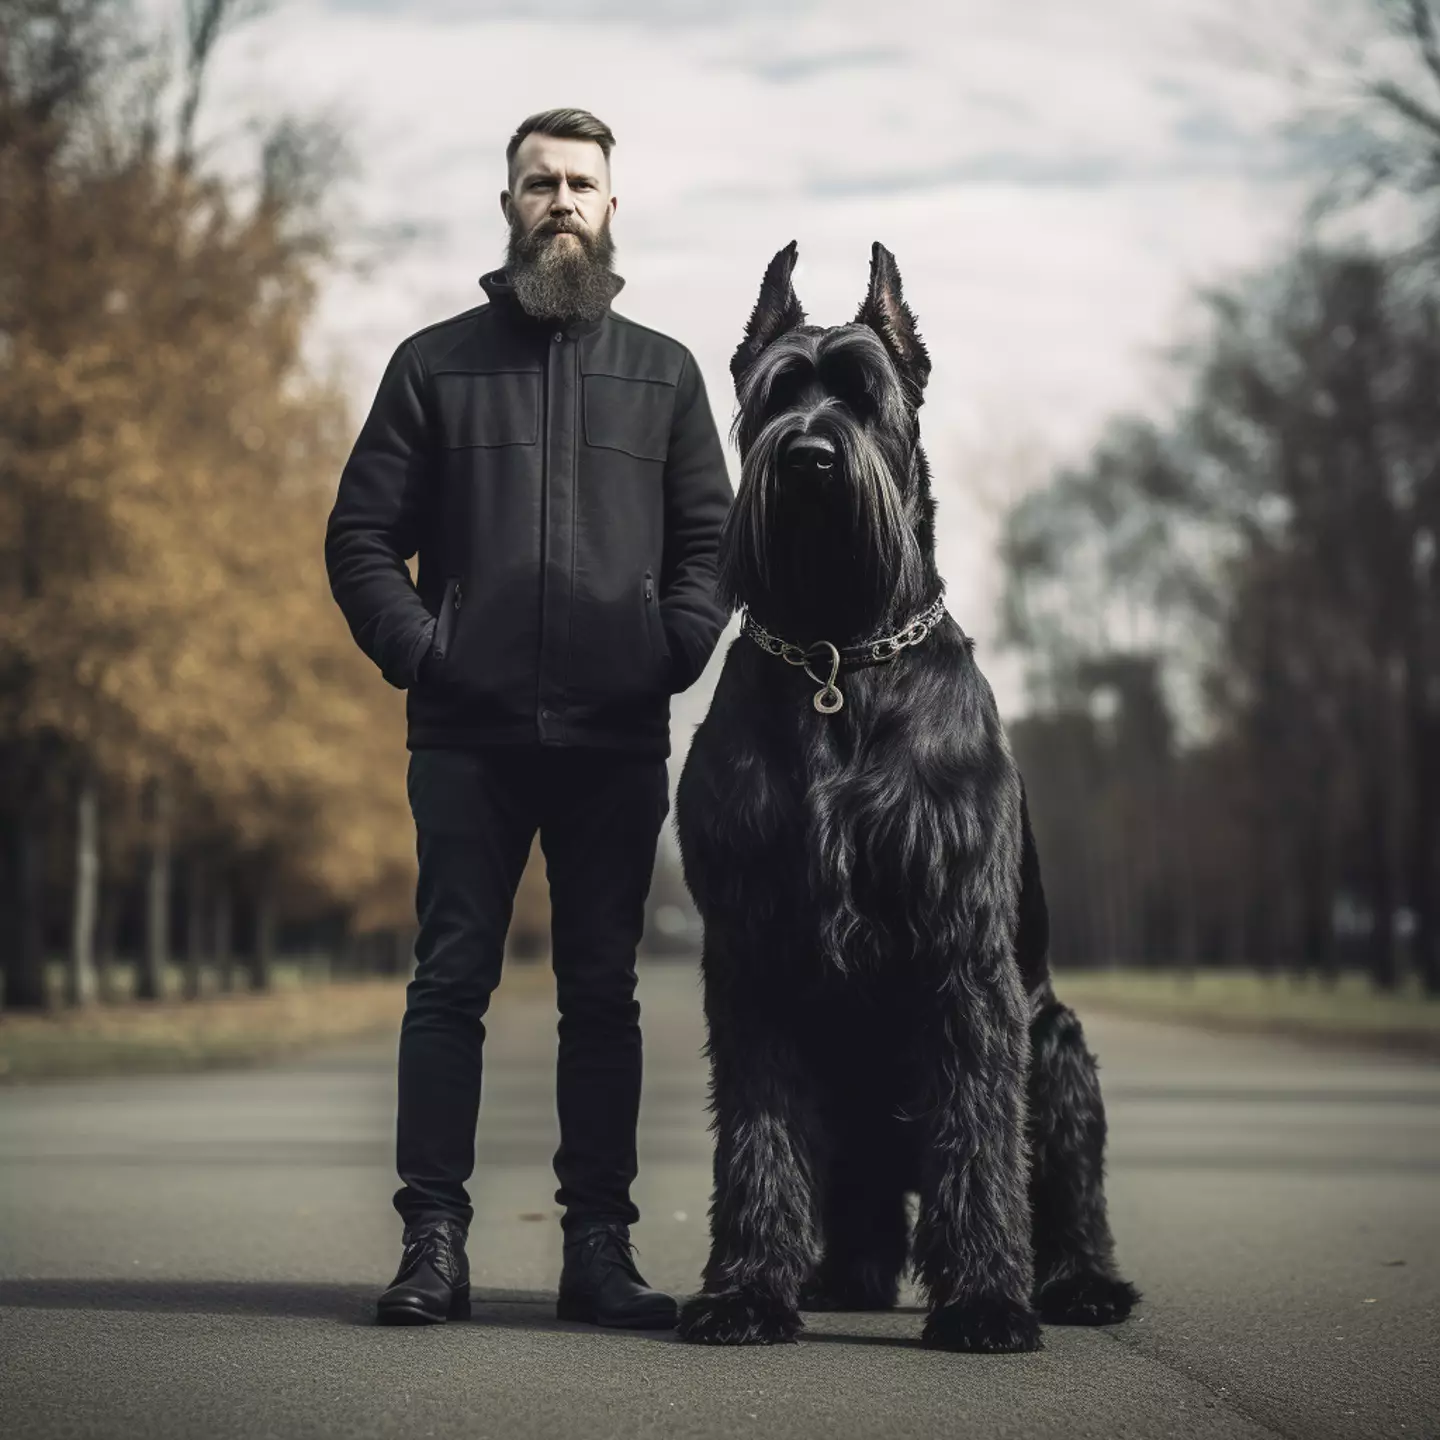 Are giant schnauzers seriously that massive?